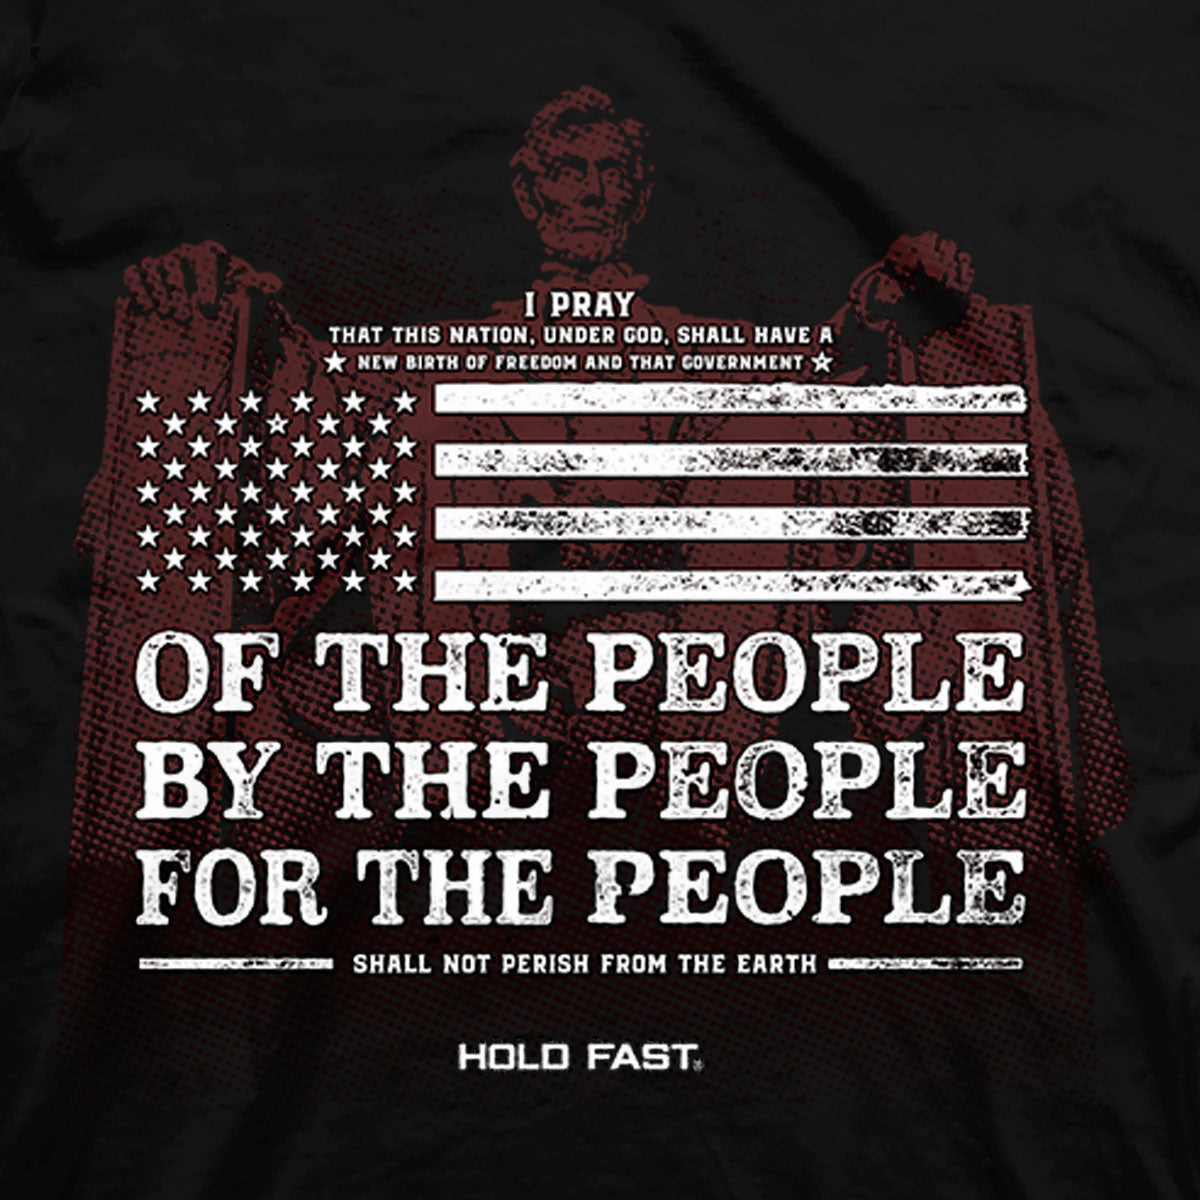 For The People Mens T-Shirt